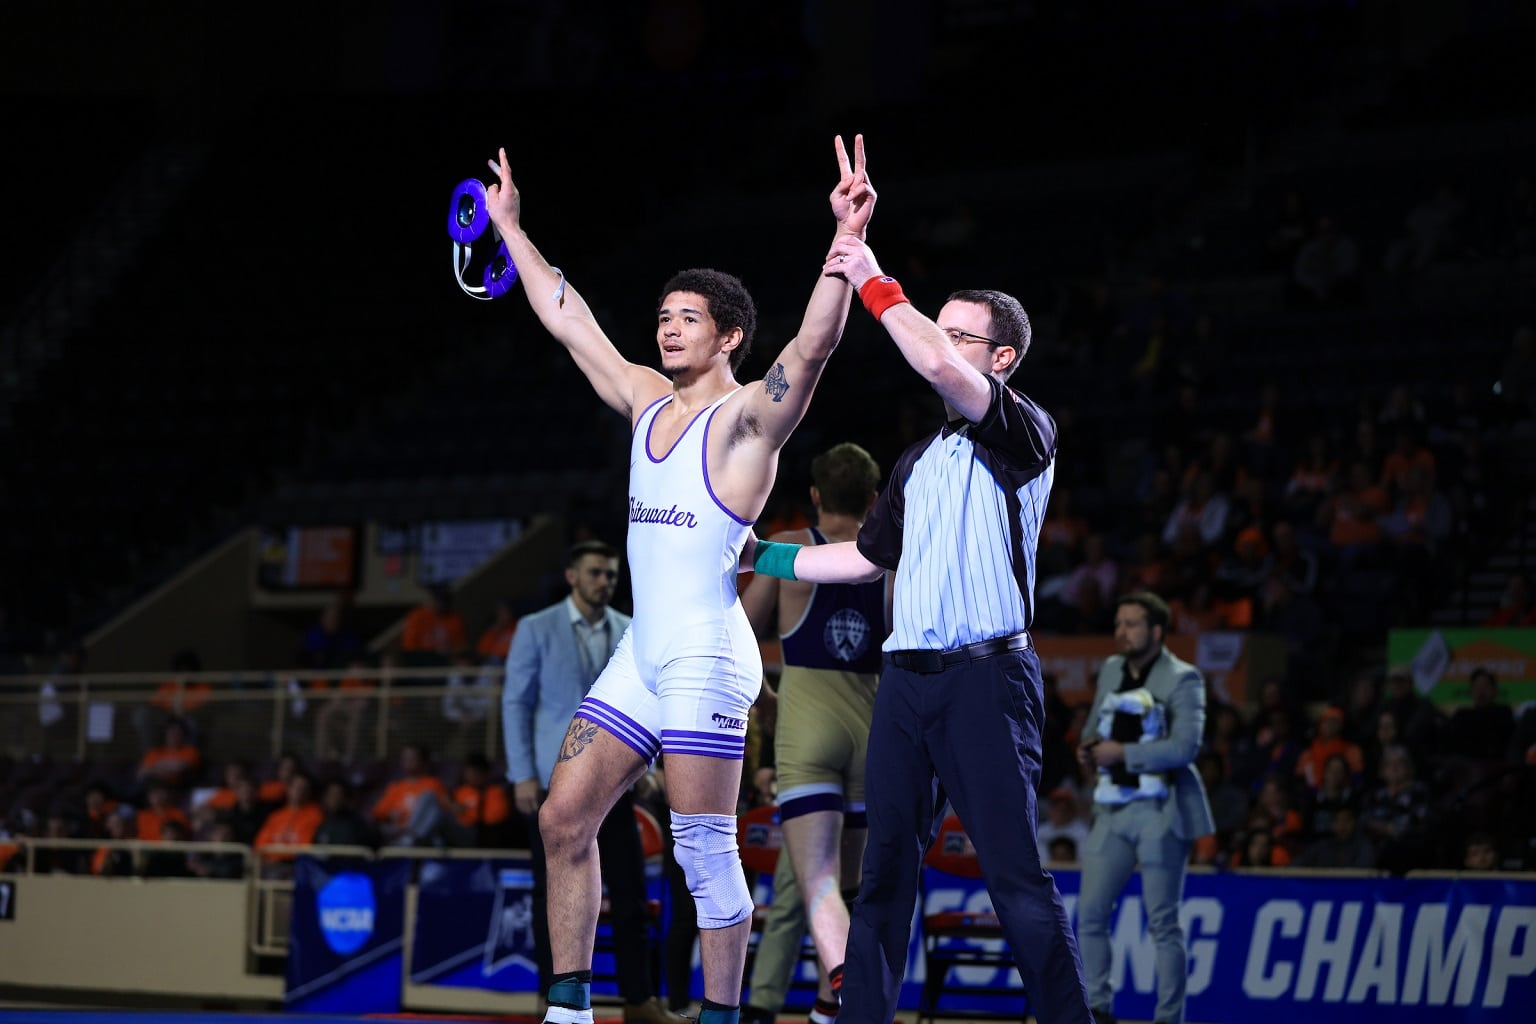 Jaritt Shinhoster Claims Second Consecutive National Title Wrestling at